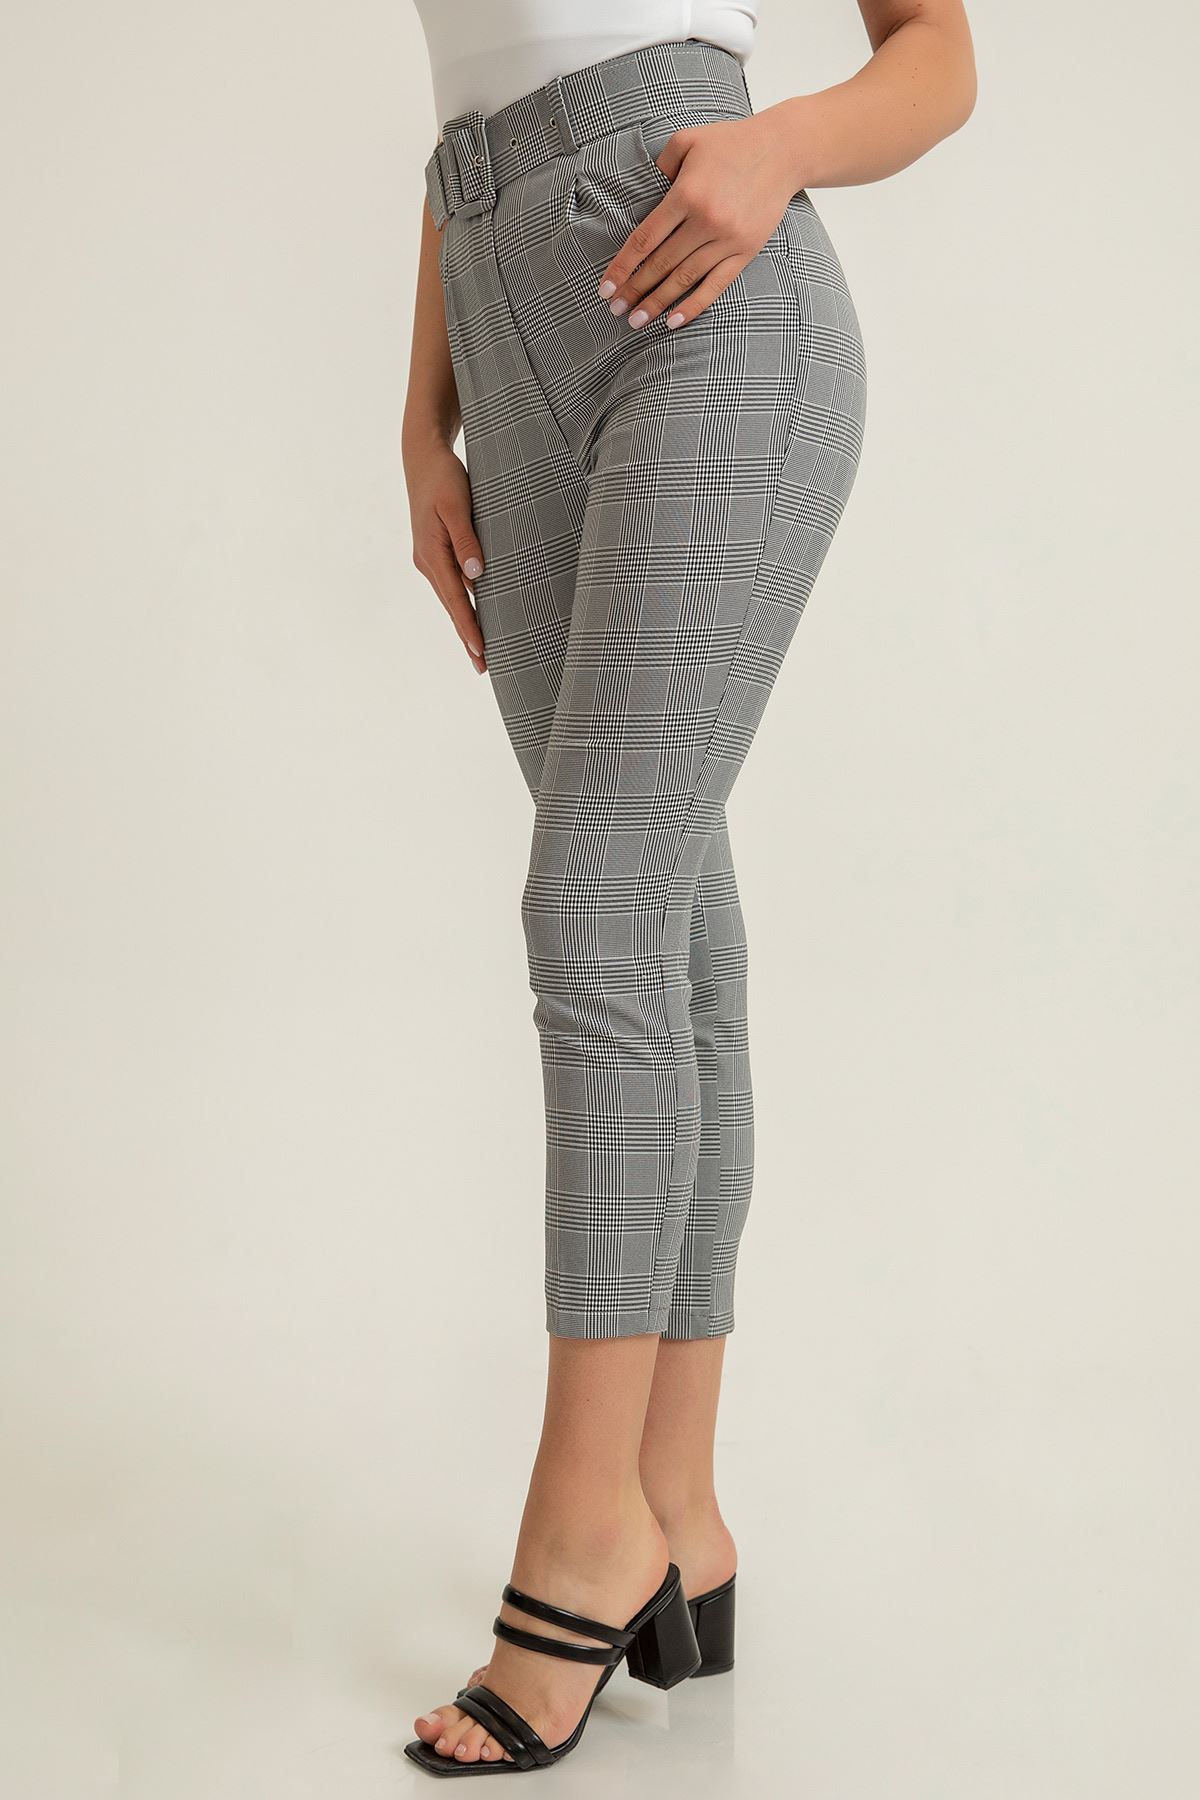 Plaid Fabric Ankle Length Classical Striped Women'S Trouser With Belt - Black